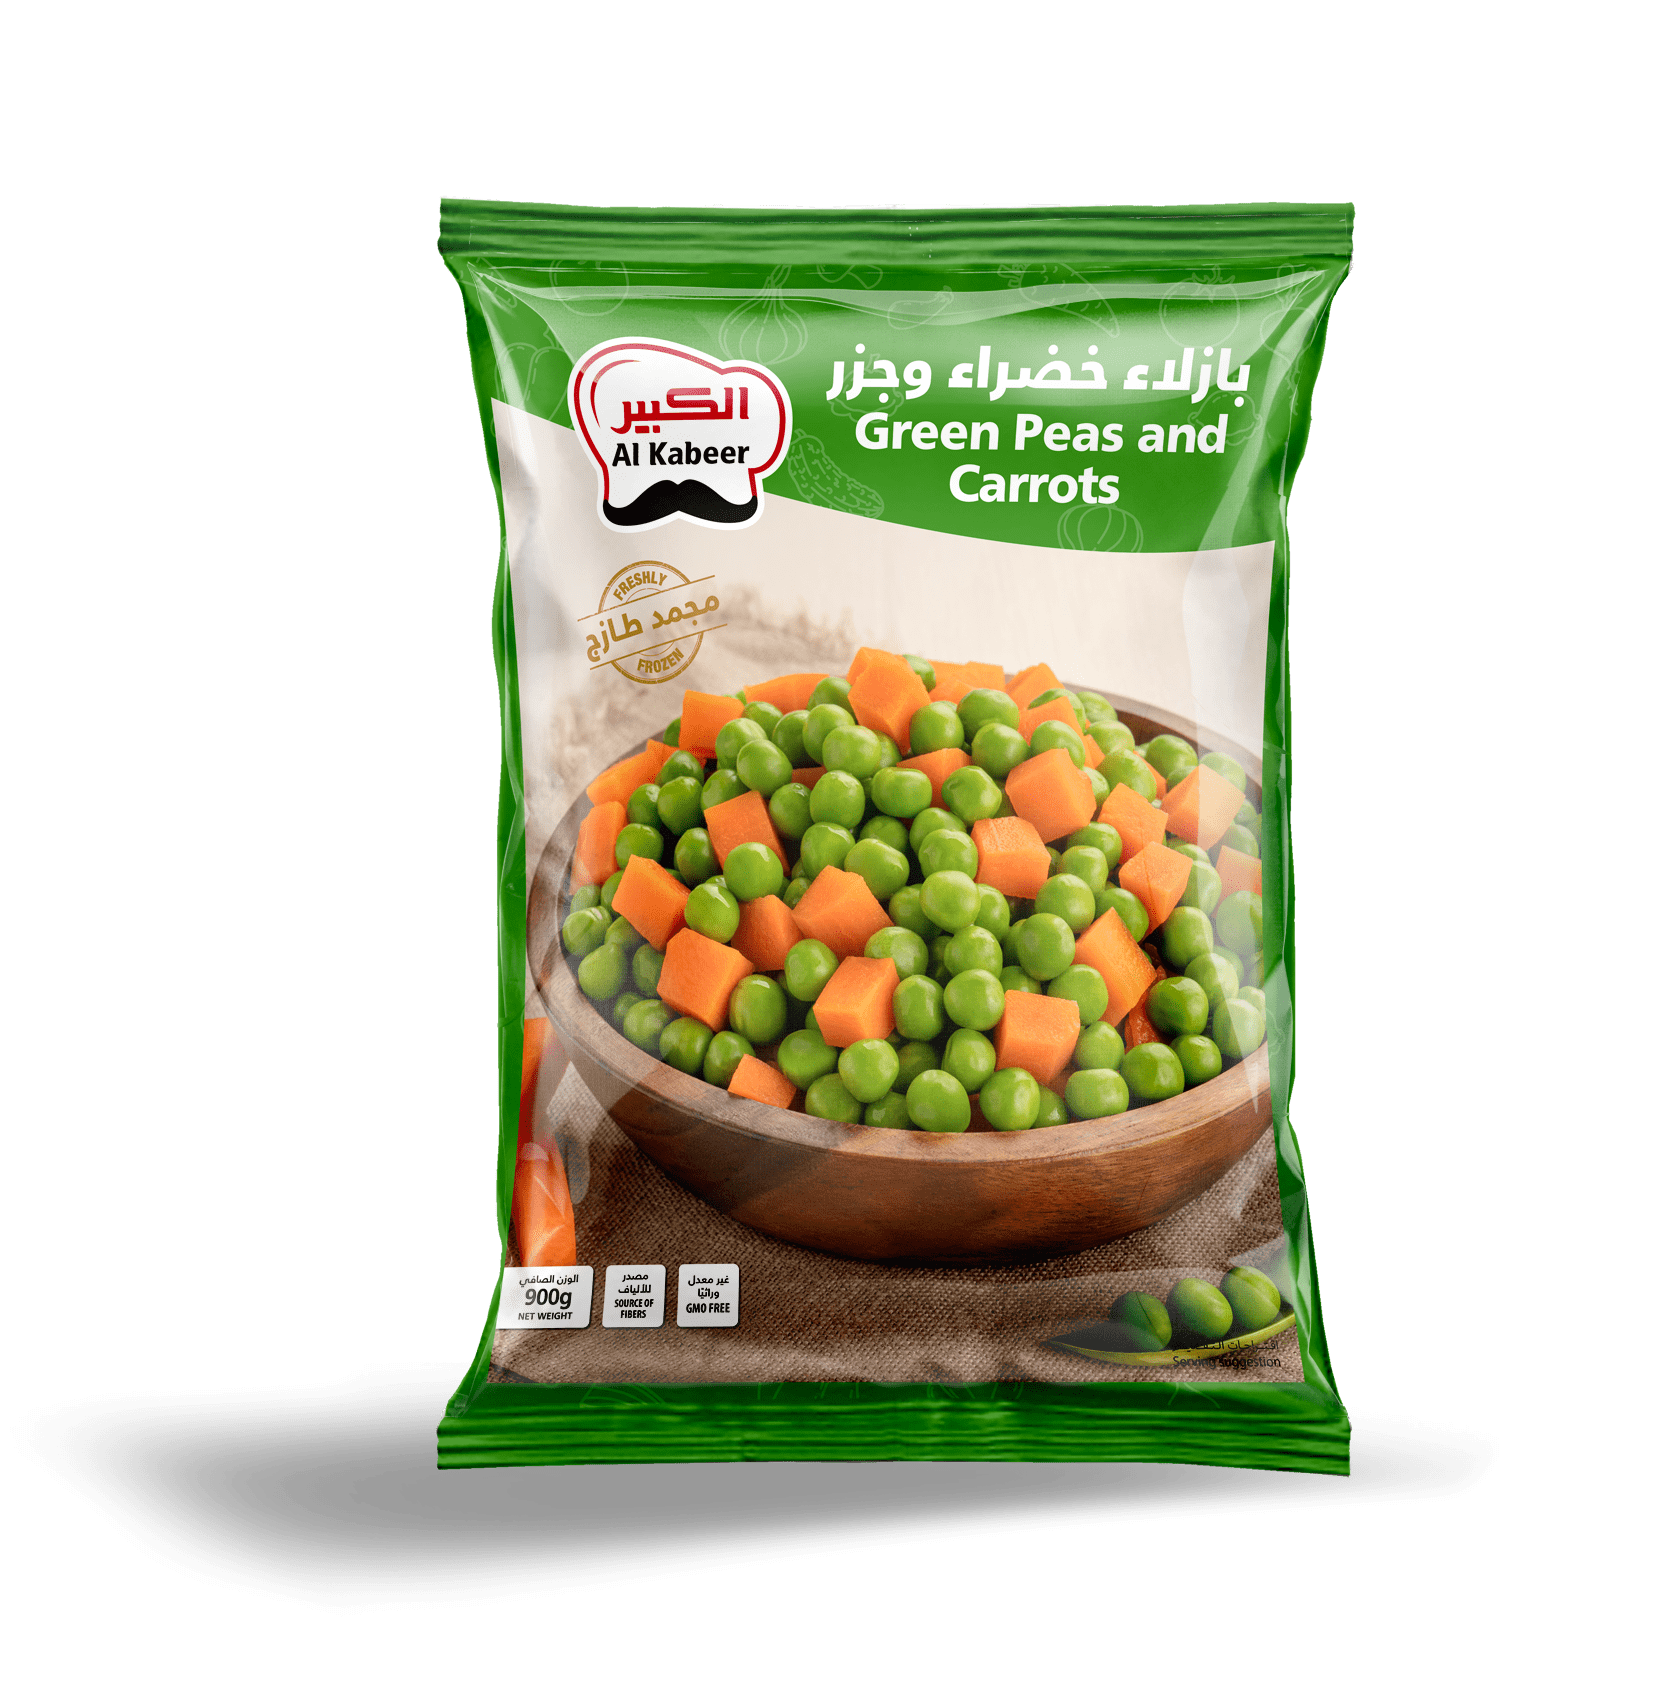 GREEN PEAS AND CARROT 900G